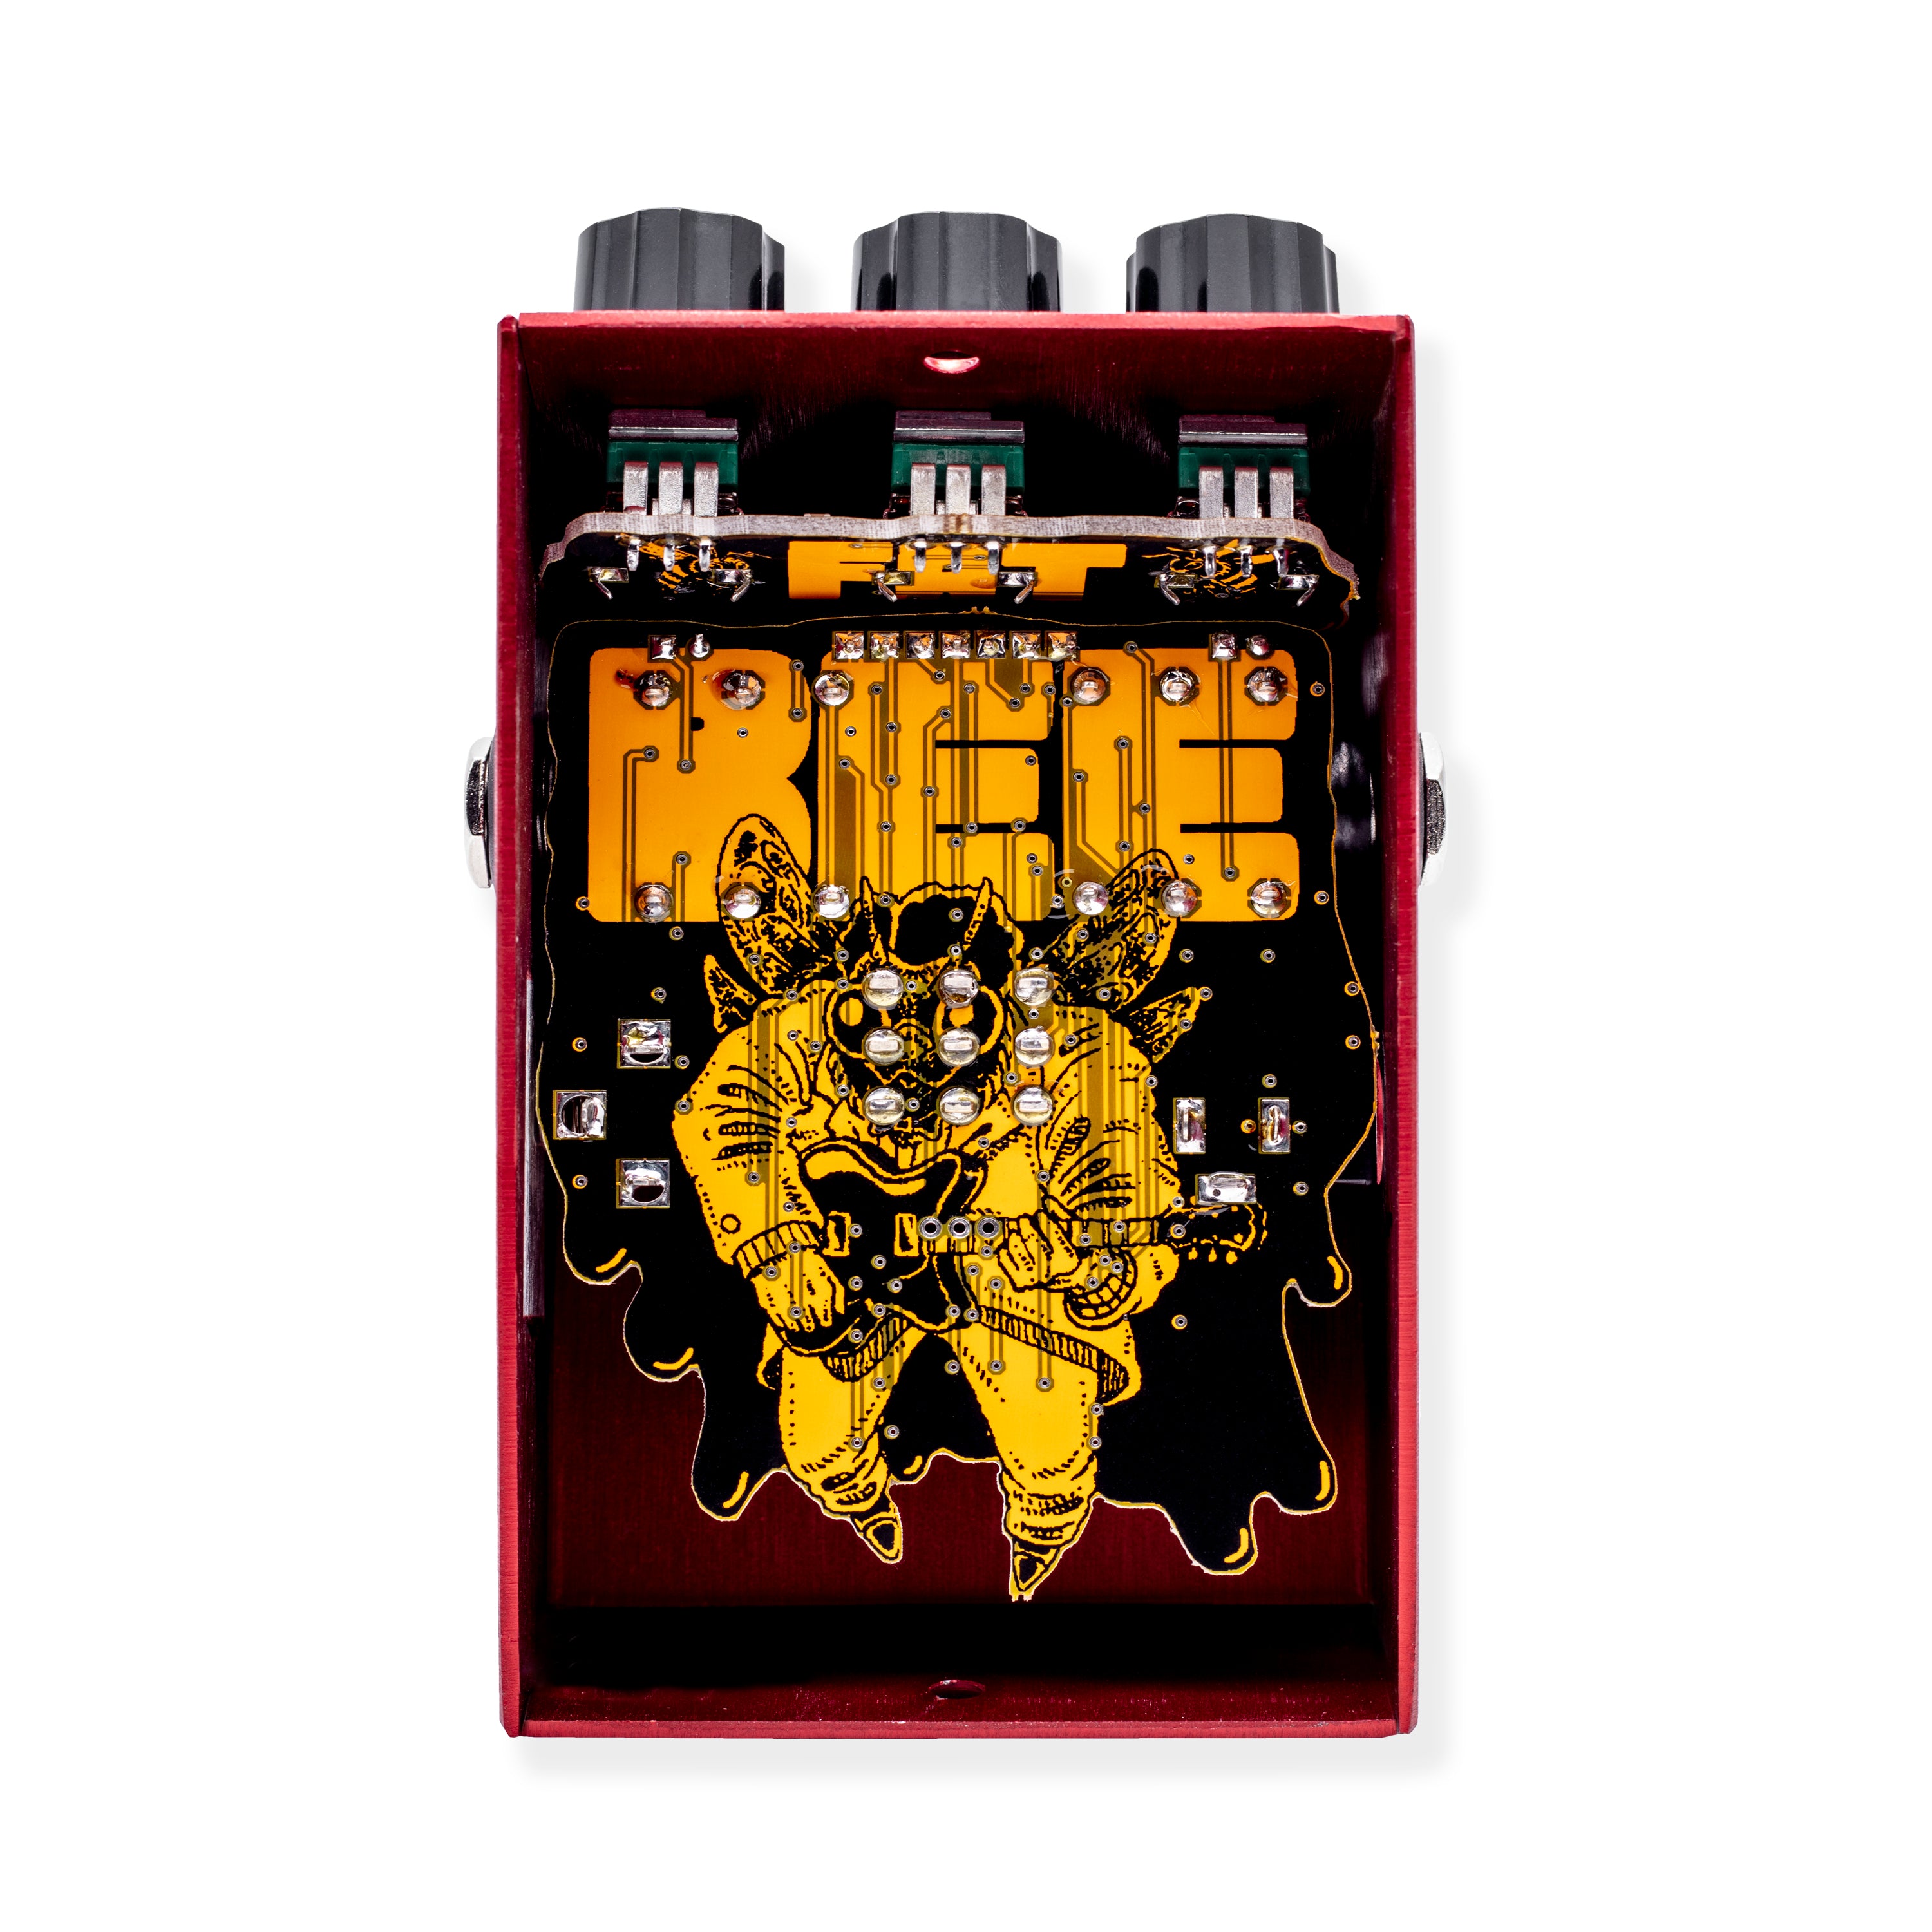 Fatbee Overdrive • BEE-STOCK